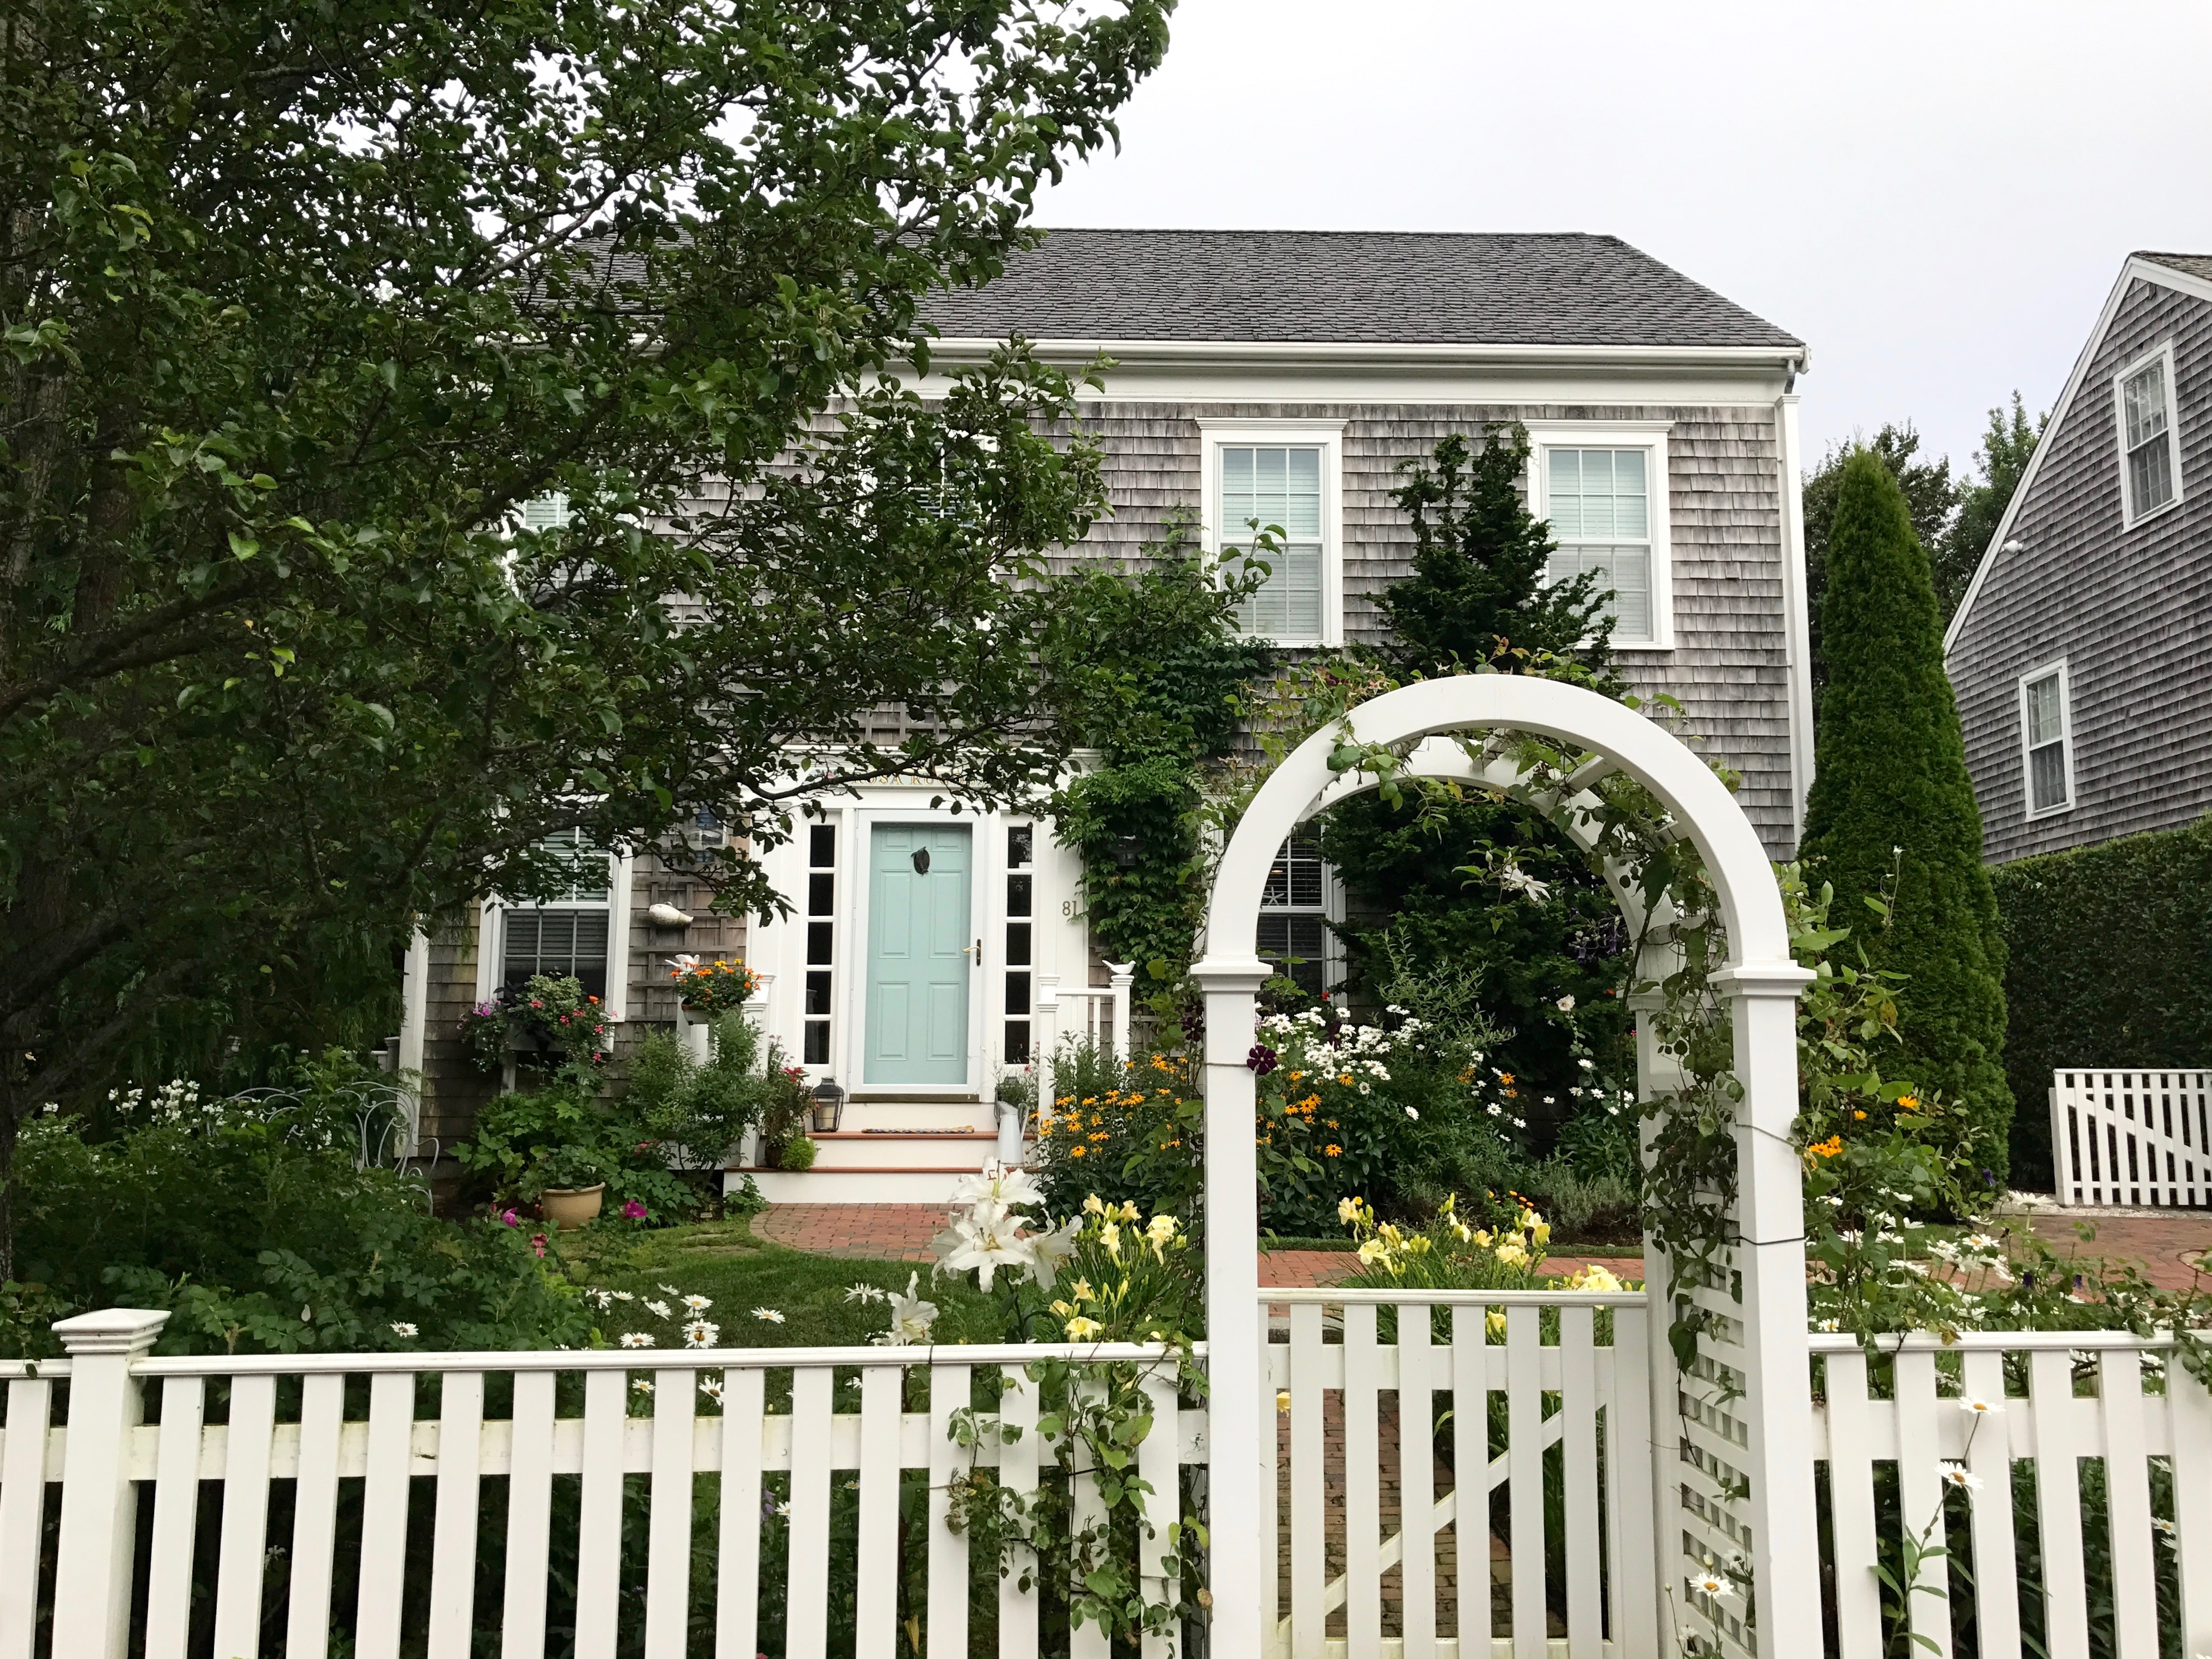 Nantucket home photo by christina dandar for The Potted Boxwood 17